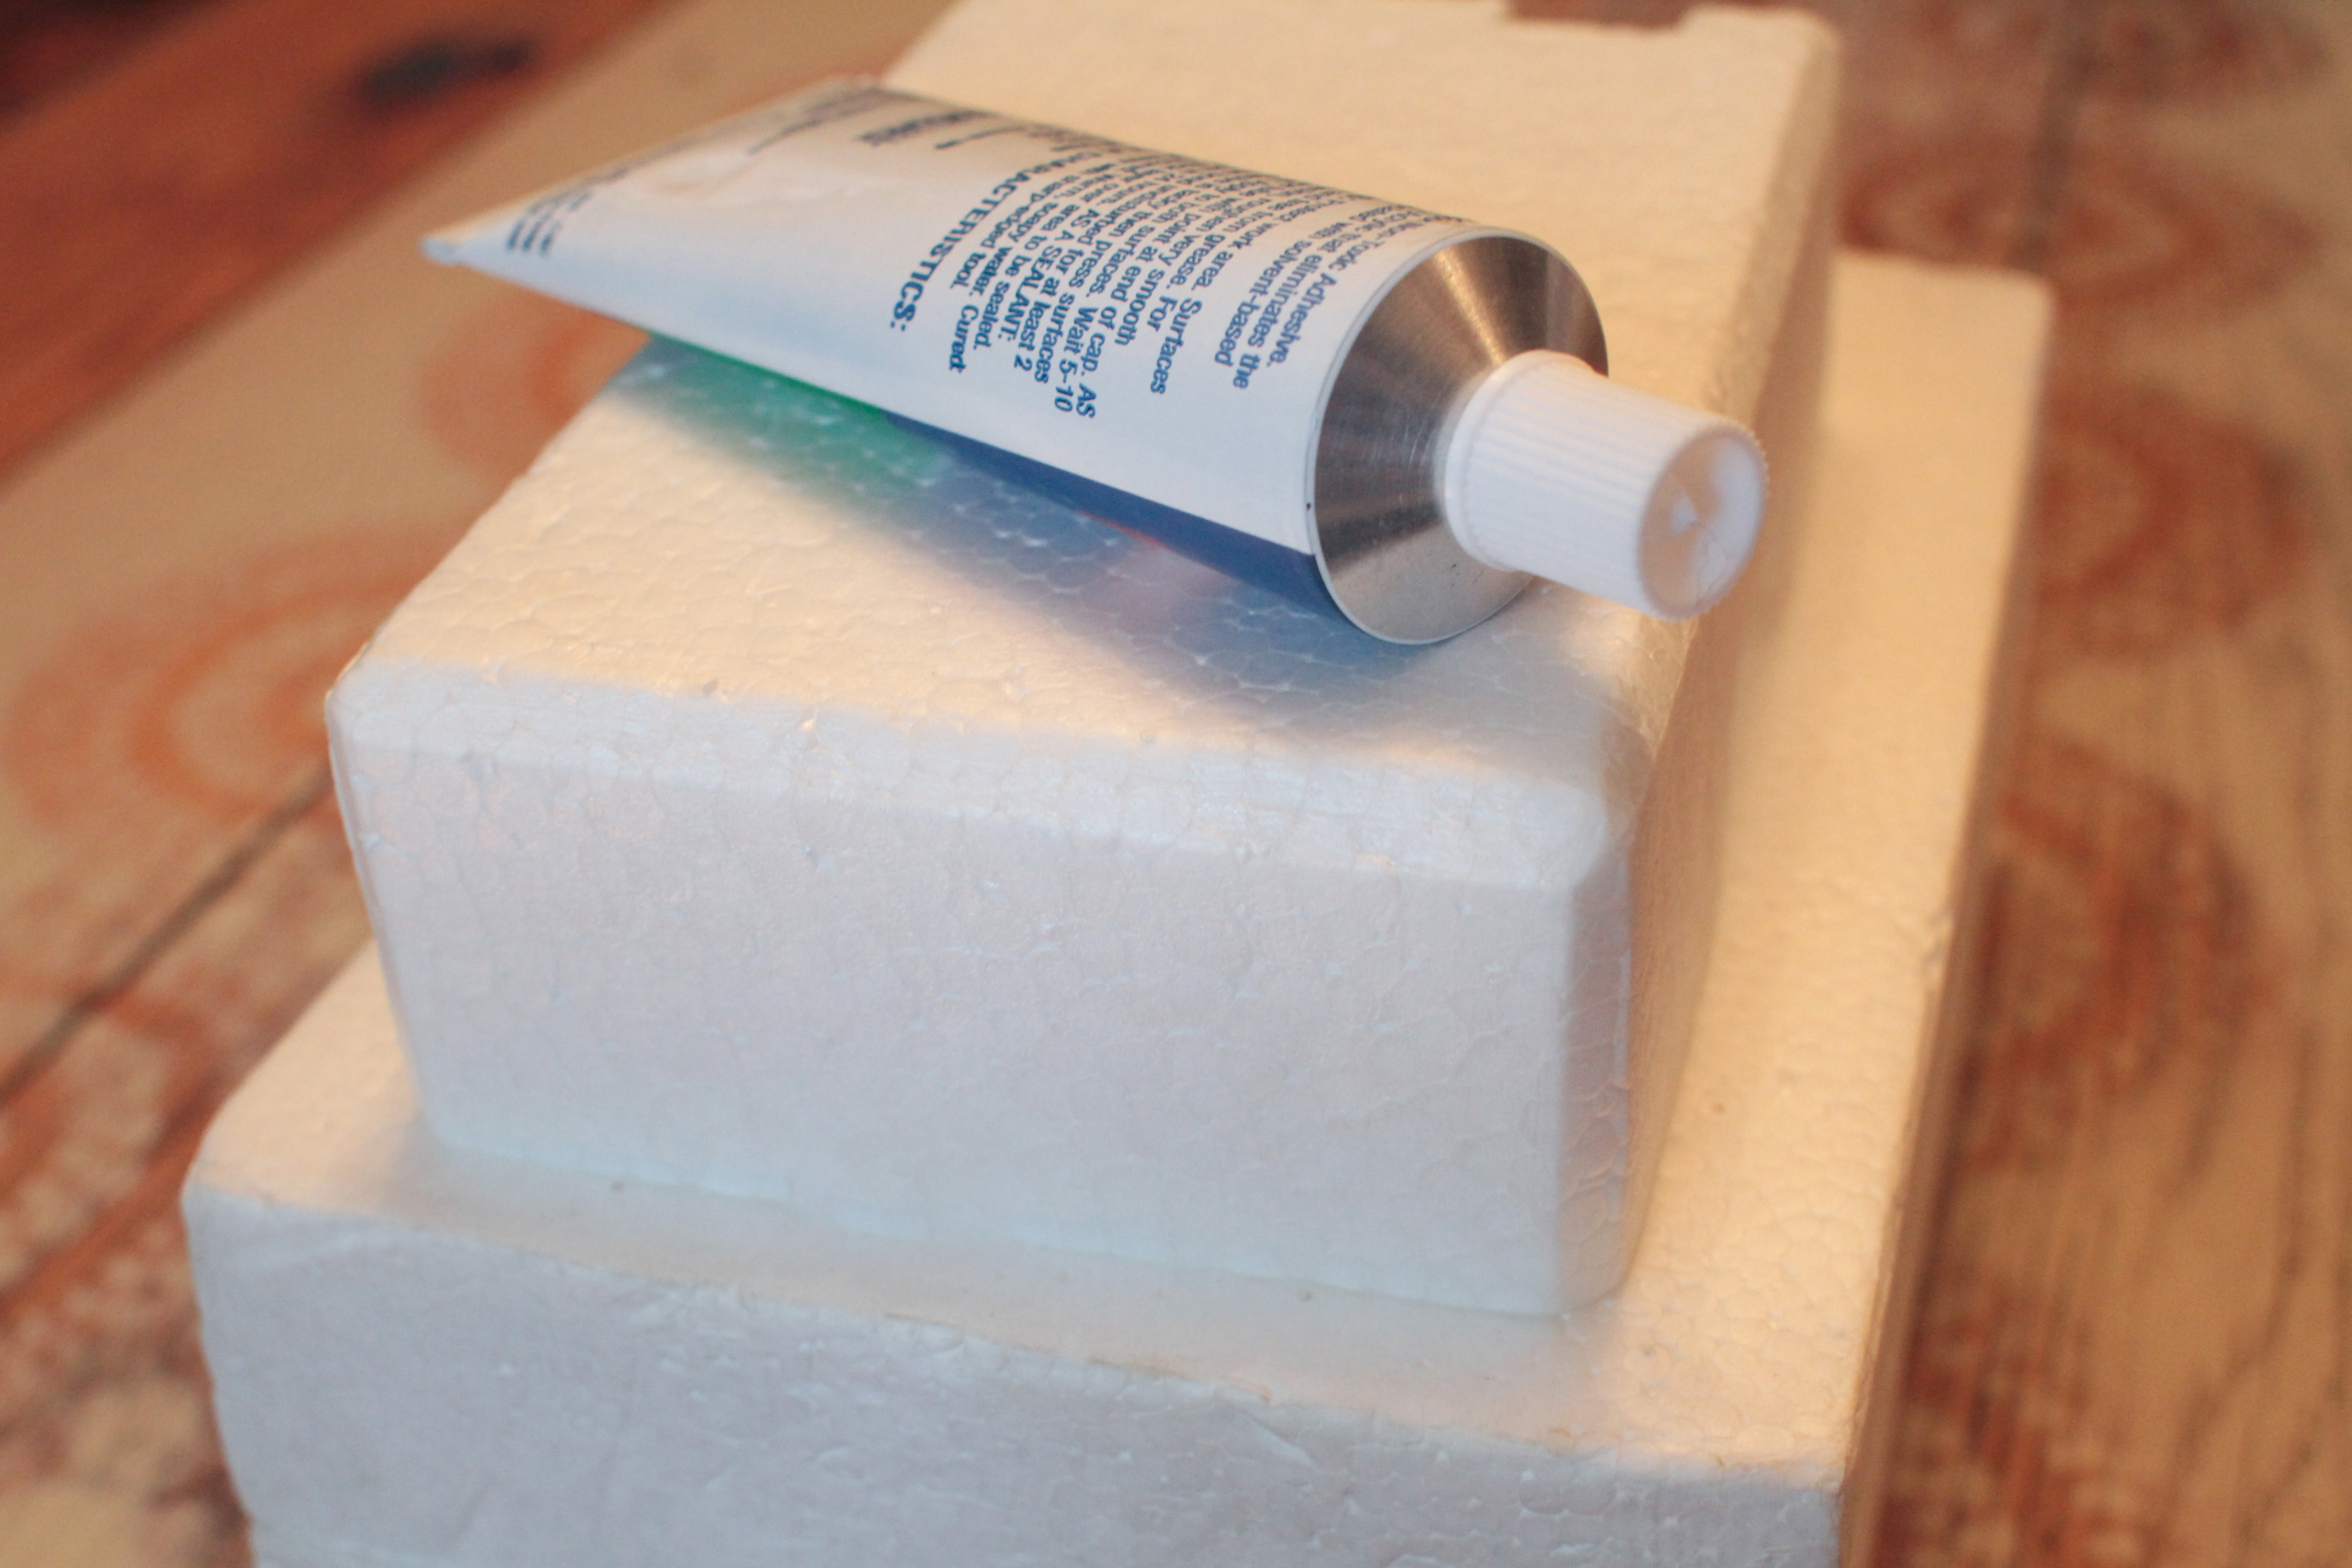 What Kind of Glue Can Be Used on Styrofoam?